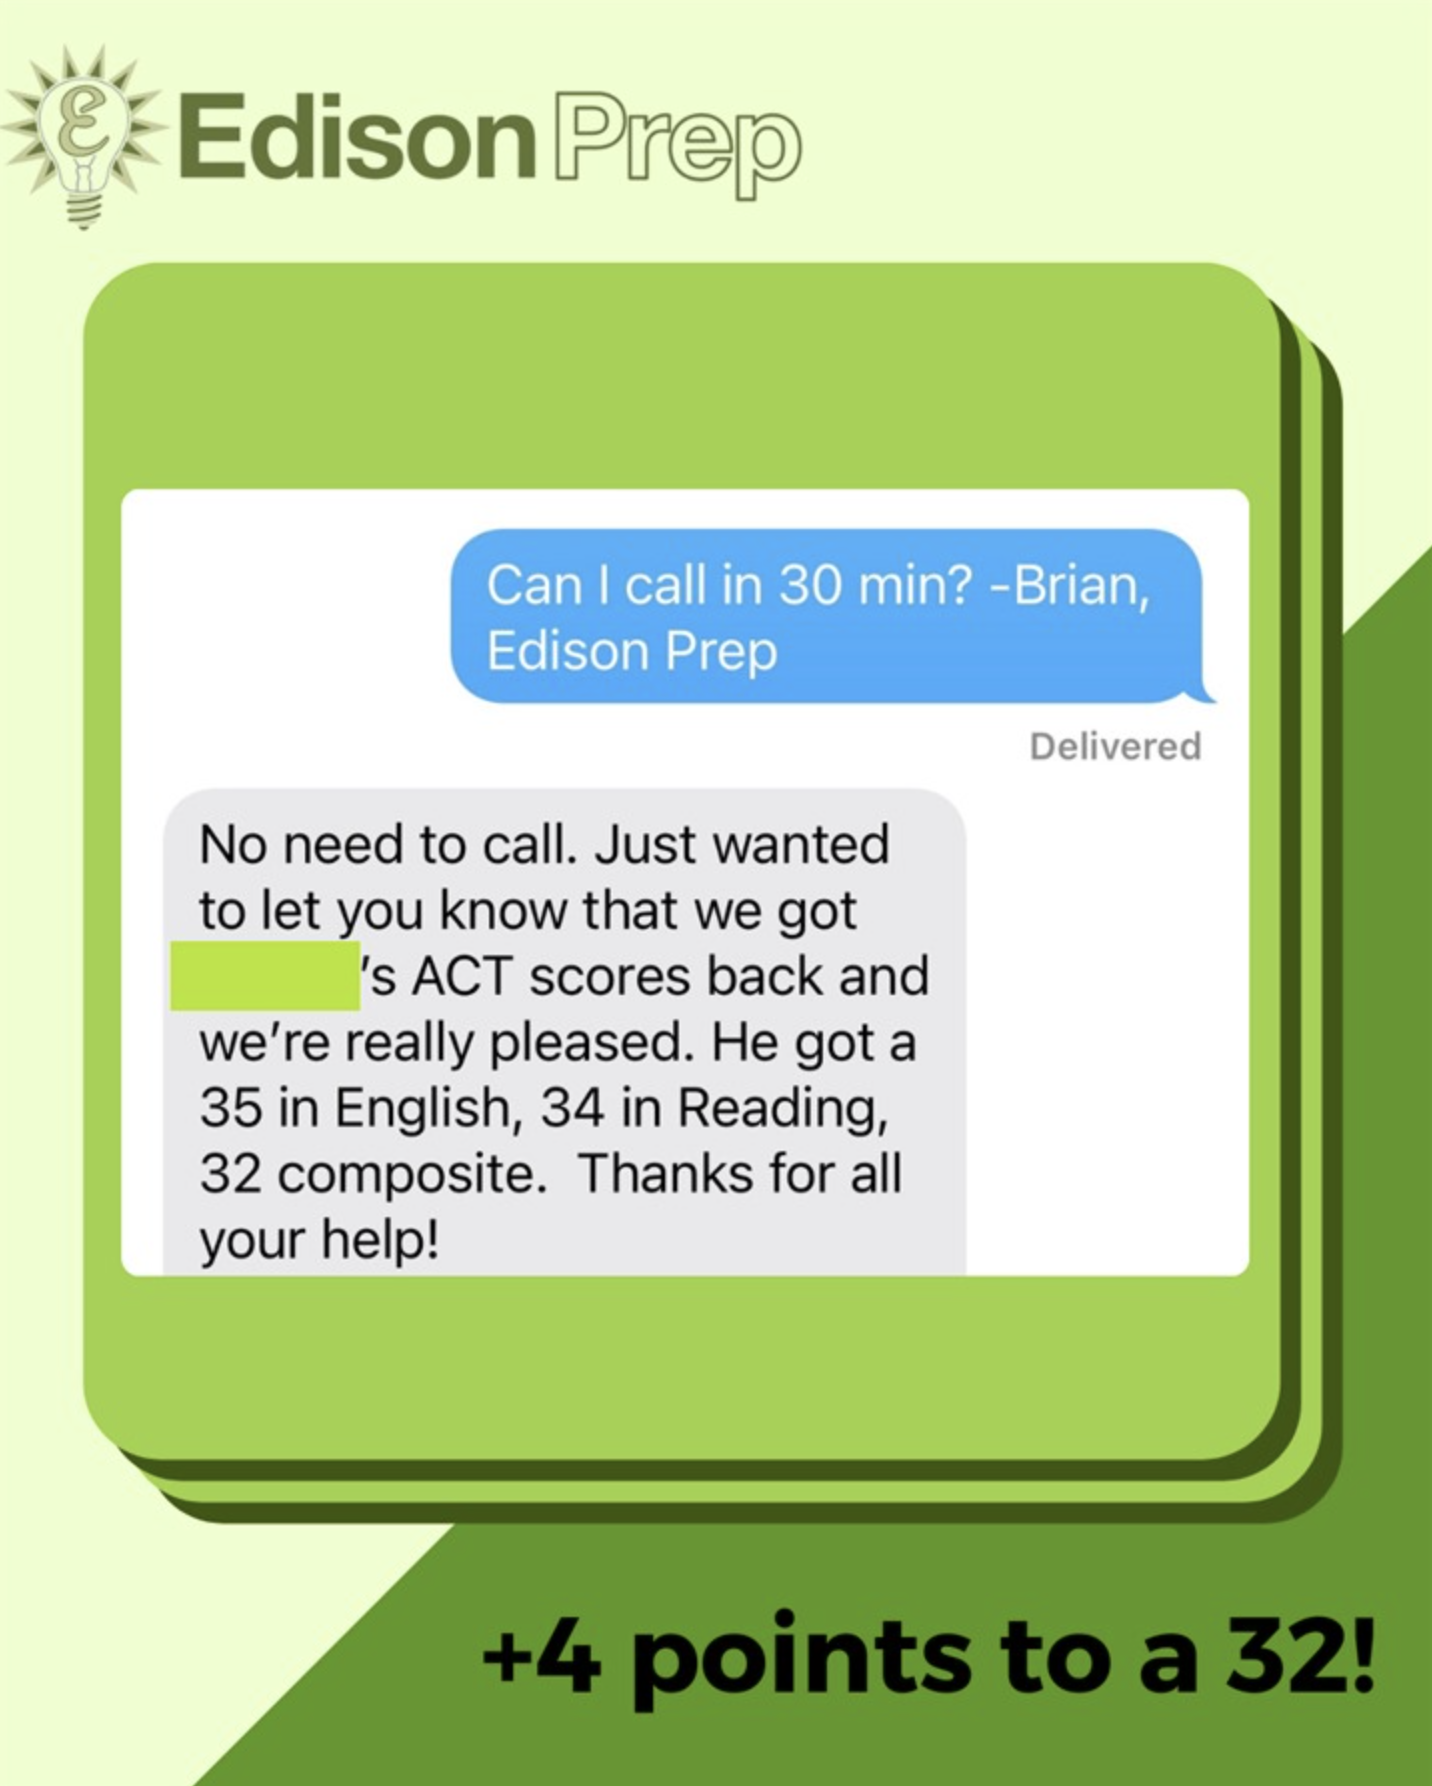 A testimonial graphic displaying a text message conversation where Brian from Edison Prep asks if he can call in 30 minutes. The reply indicates there's no need for a call and shares the exciting news of a student's ACT score improvement, with a 35 in English, 34 in Reading, and a composite of 32. At the bottom, a large plus sign and the numbers '4 points to a 32!' emphasize the score increase.